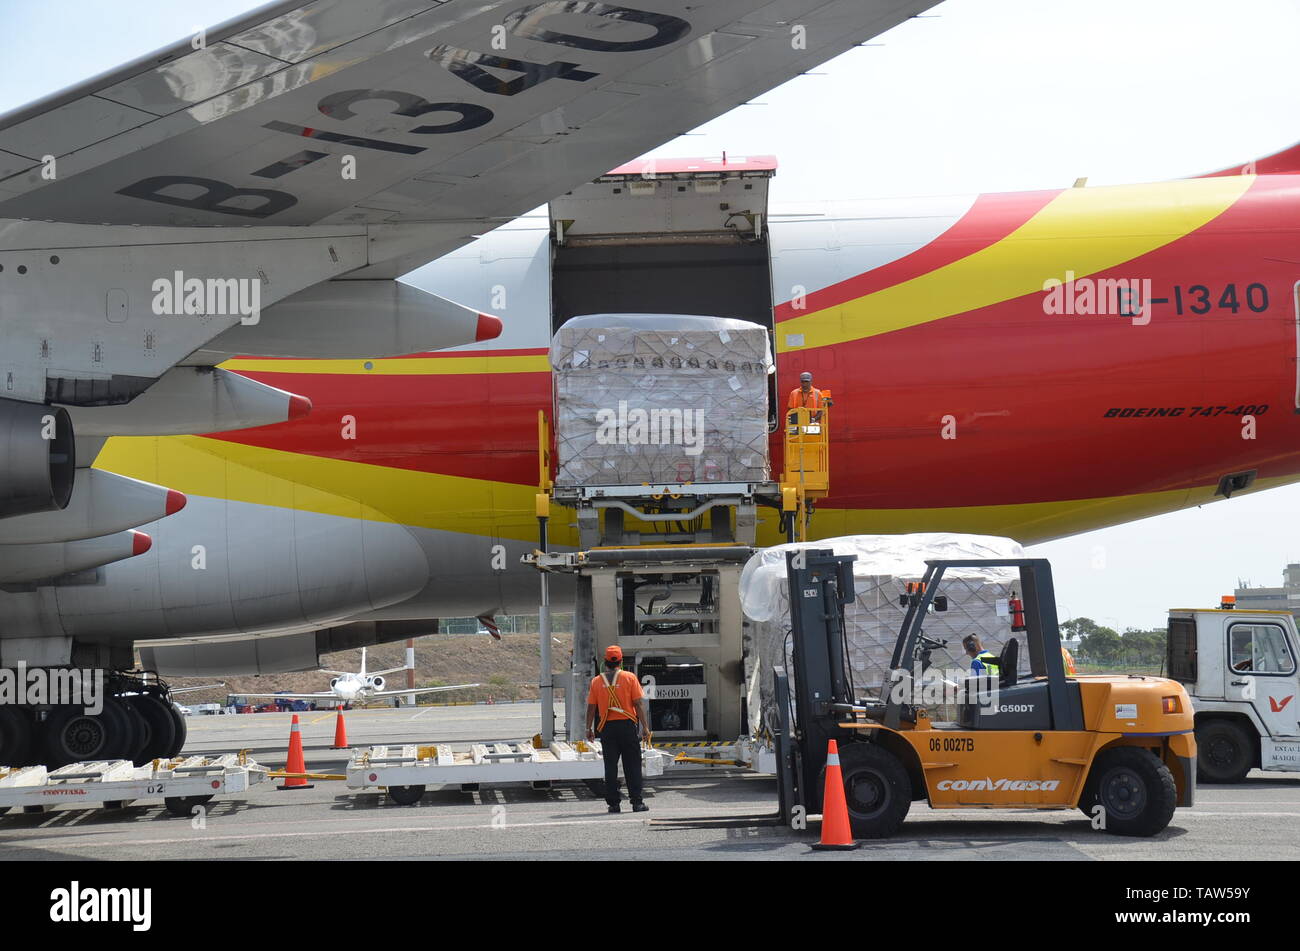 Caracas, Venezuela. 27th May, 2019. An airplane loaded with the 4th batch of humanitarian aid from China arrives at the international airport in Caracas, Venezuela, on May 27, 2019. Venezuela received 68 tons of humanitarian aid offered by China on Monday, the 4th such batch with a shipment of medicine and other medical items. Credit: Xu Ye/Xinhua/Alamy Live News Stock Photo